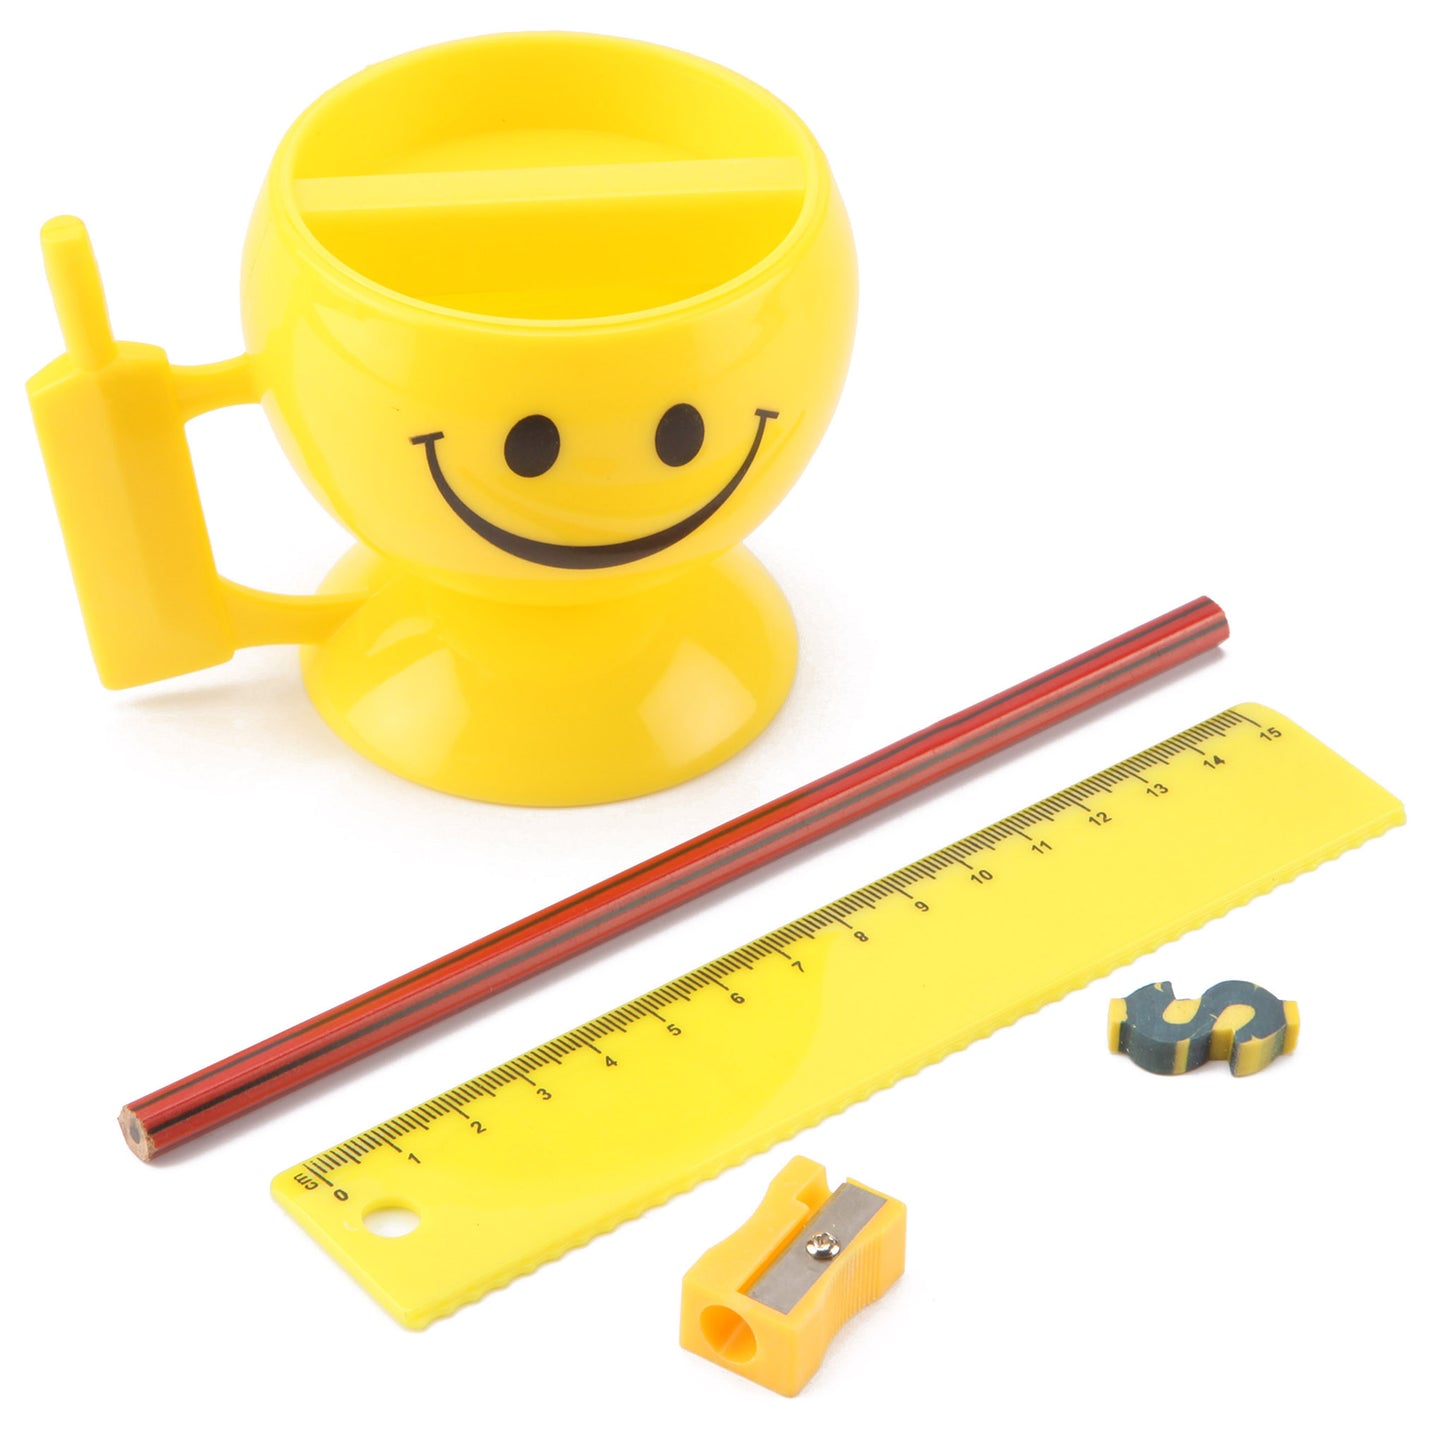 Smile Cup Stationery Kit